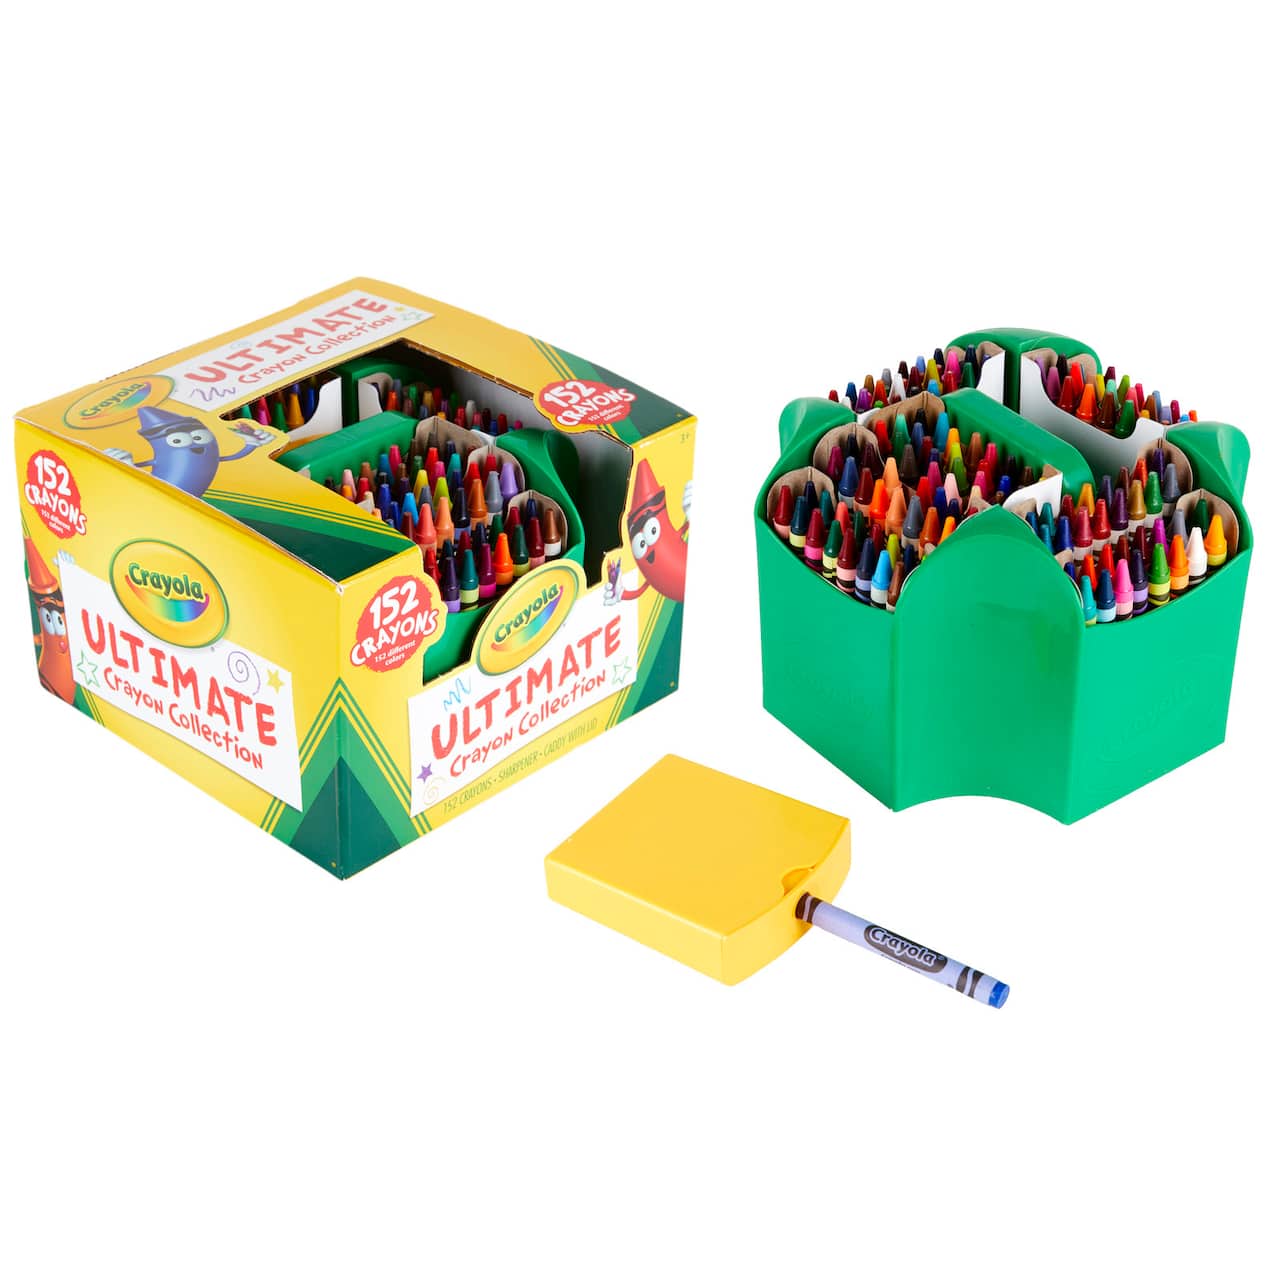 6 Packs: 152 ct. (912 total) Crayola® Ultimate Crayon Collection